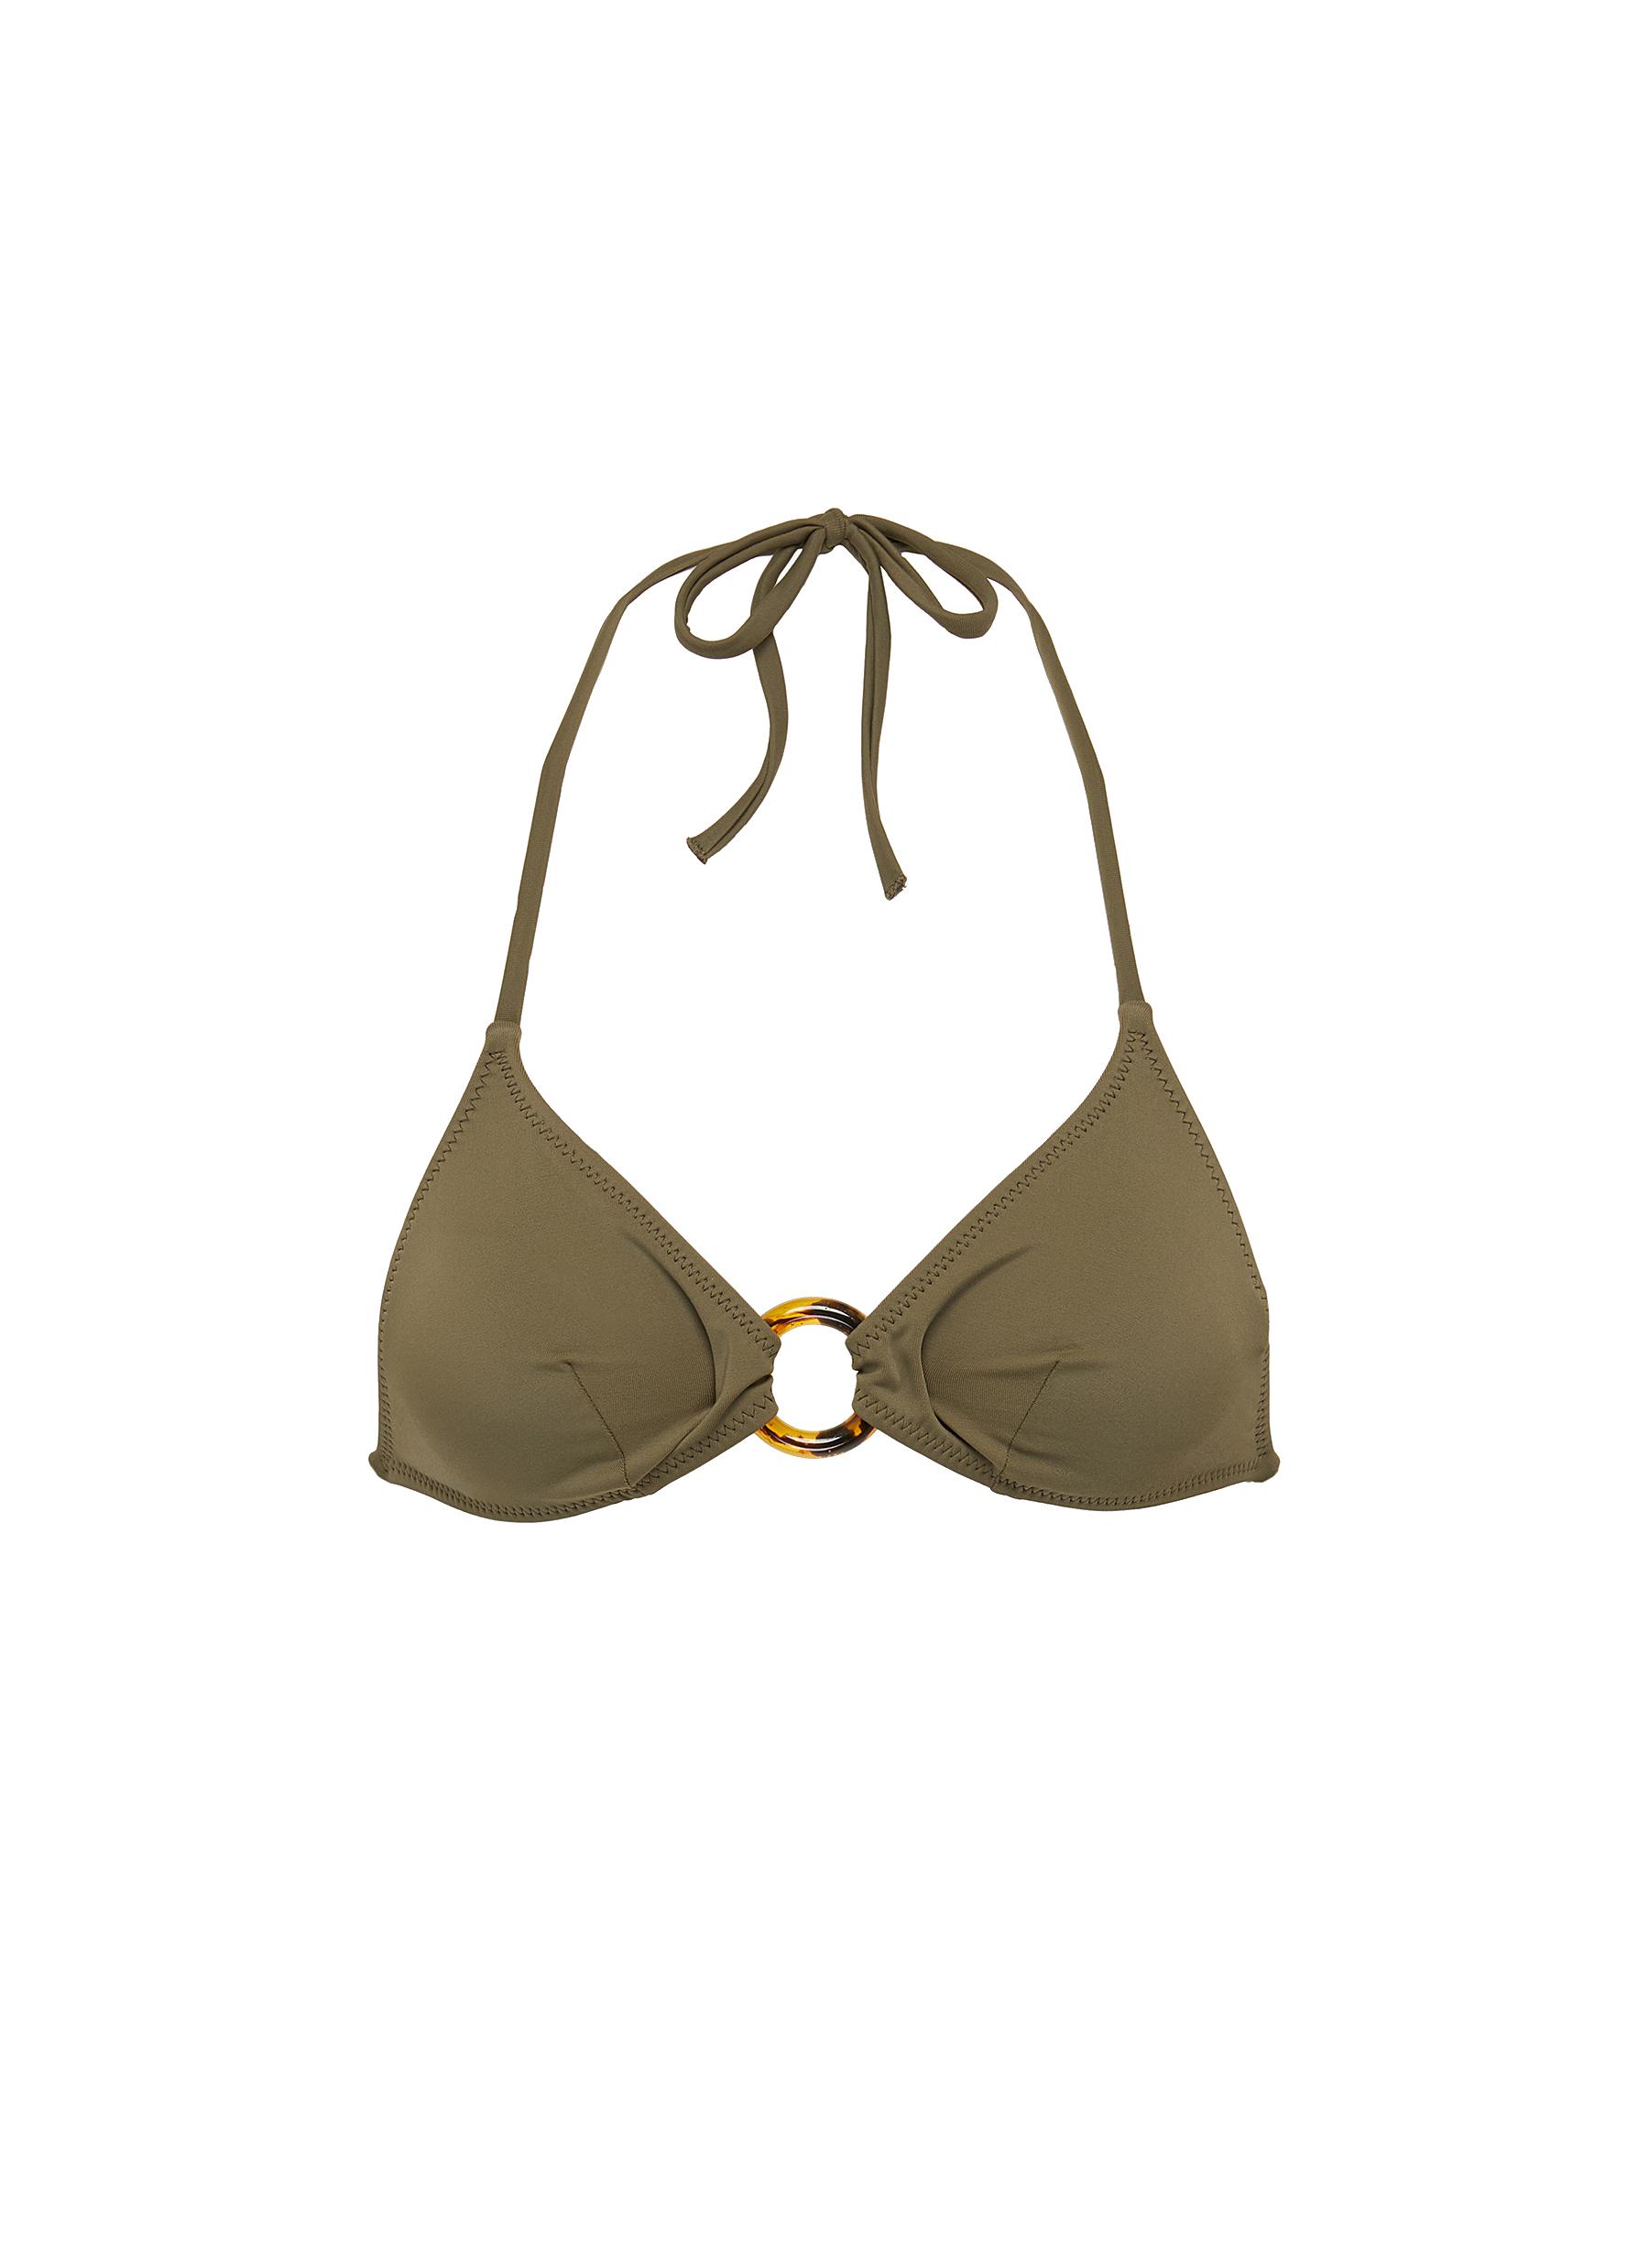 The Sadle ring halterneck triangle bikini top by Solid & Striped